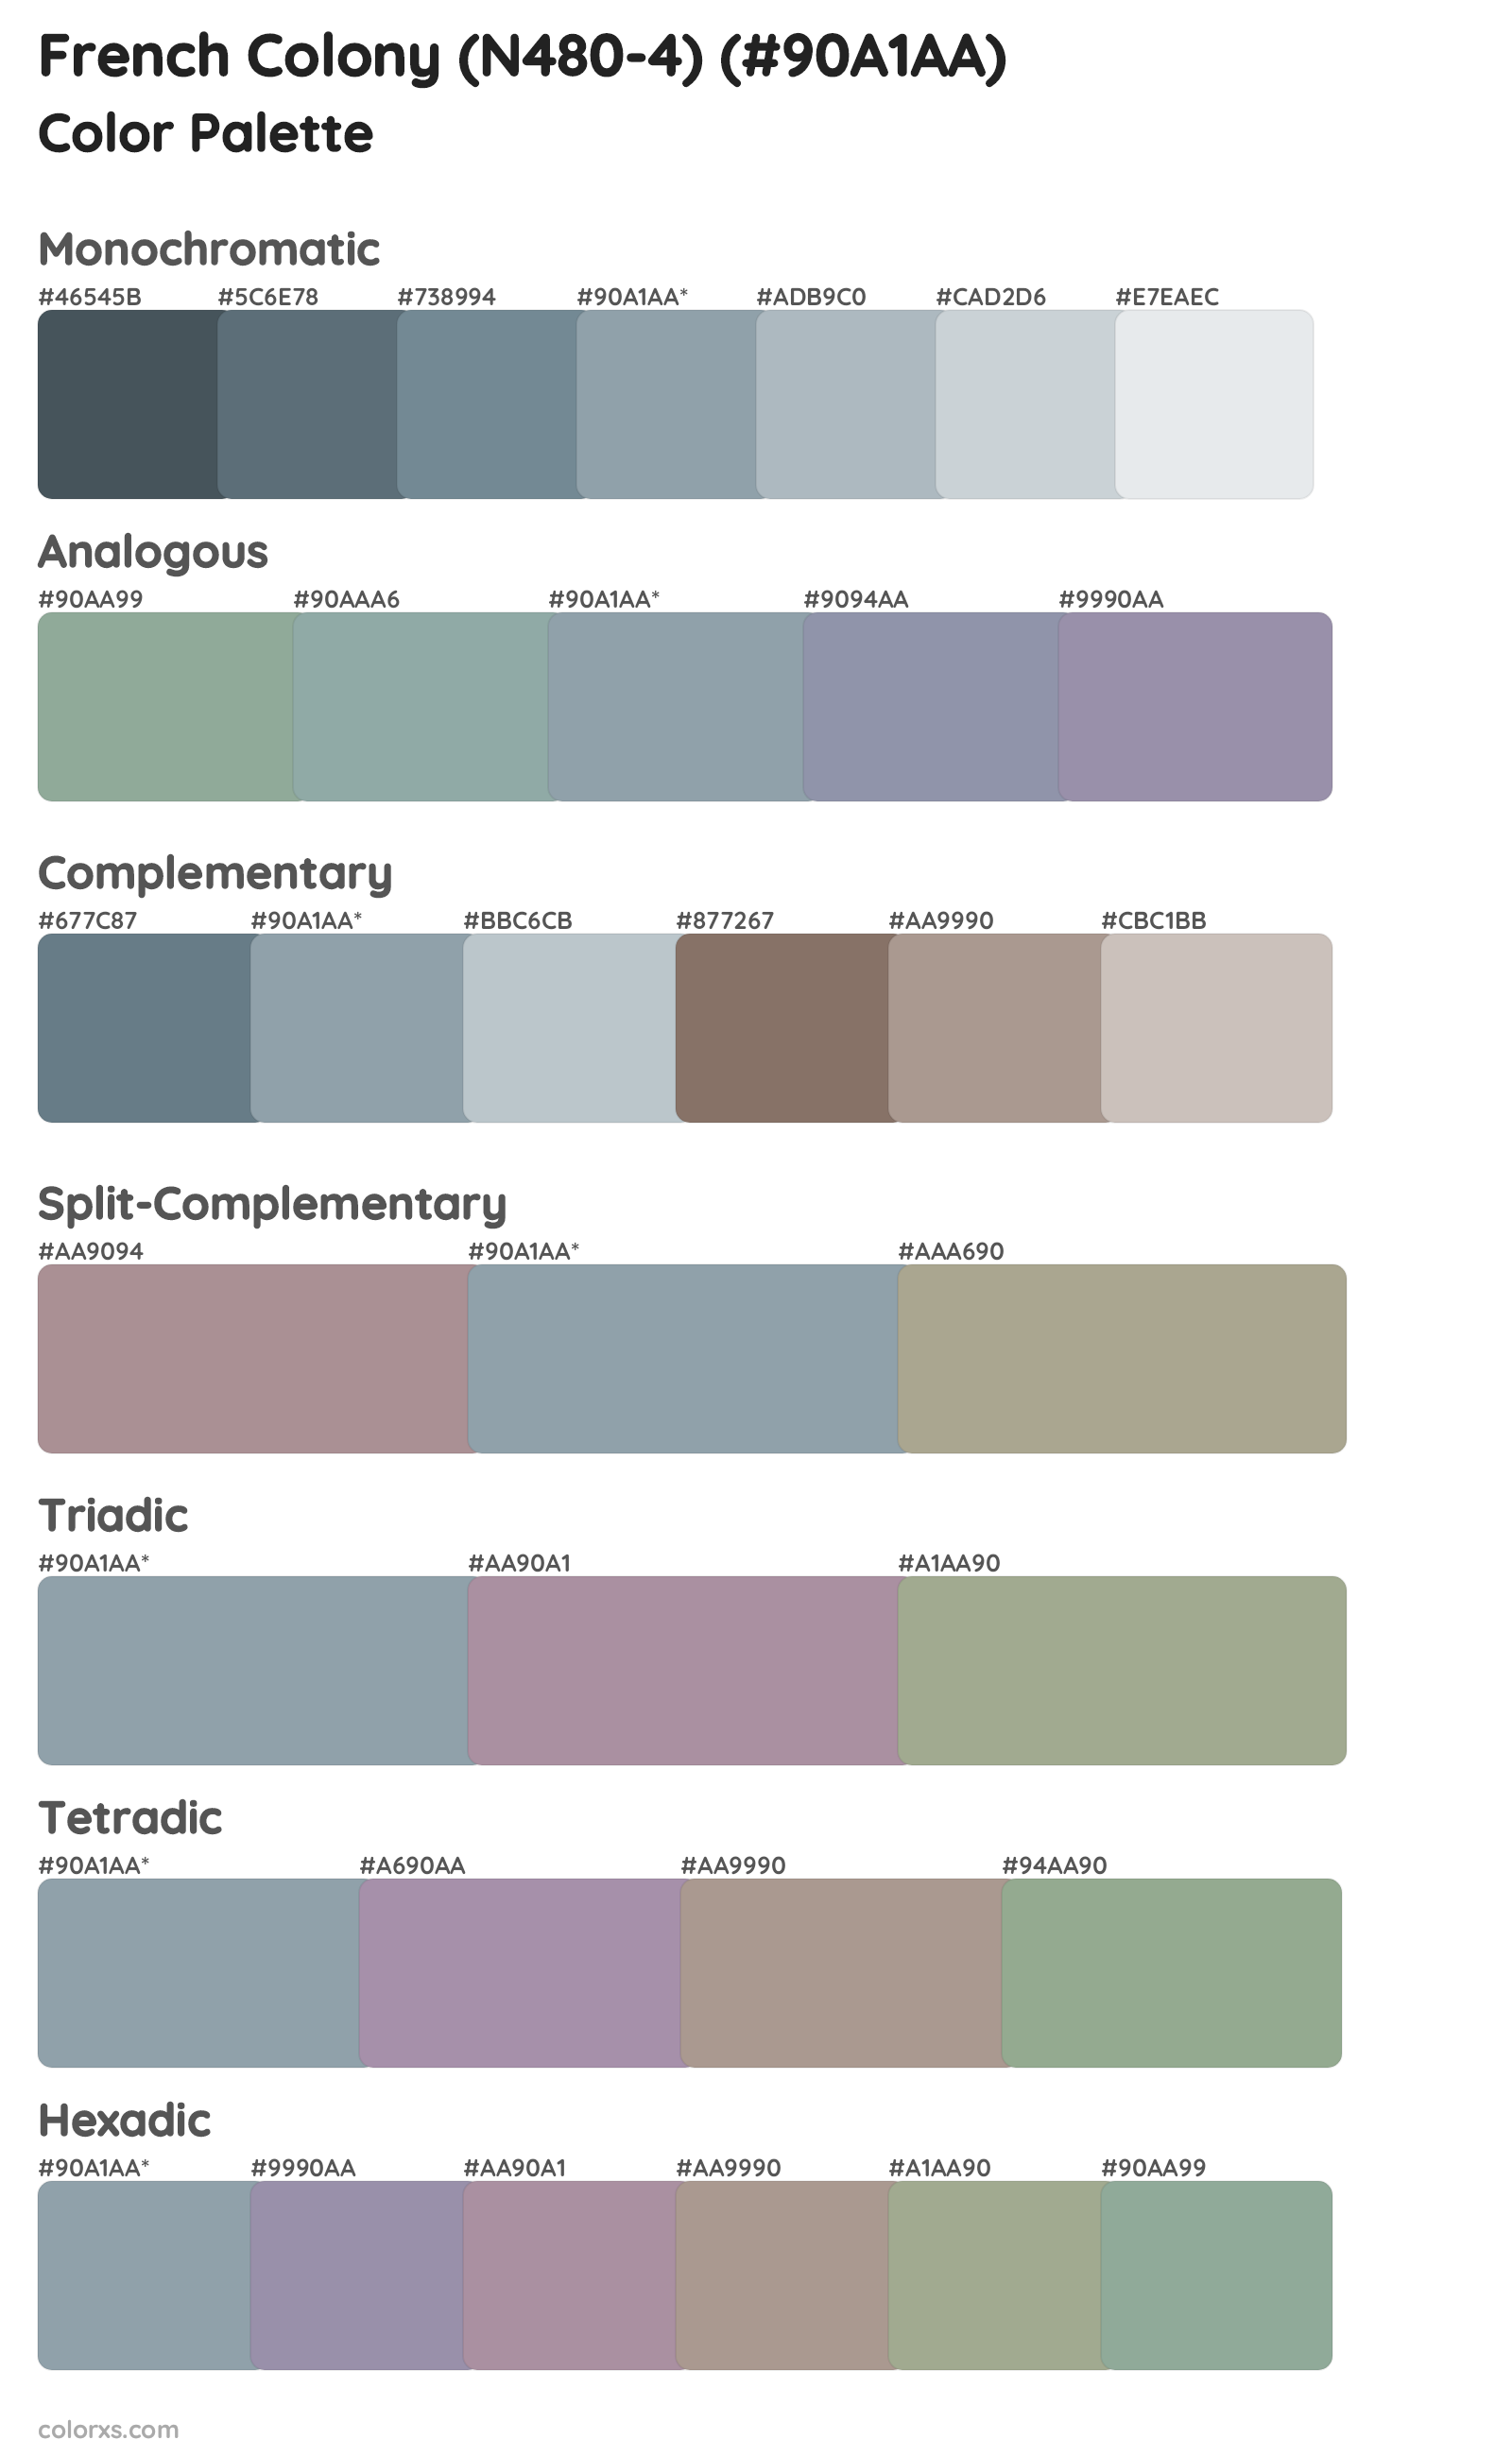 French Colony (N480-4) Color Scheme Palettes